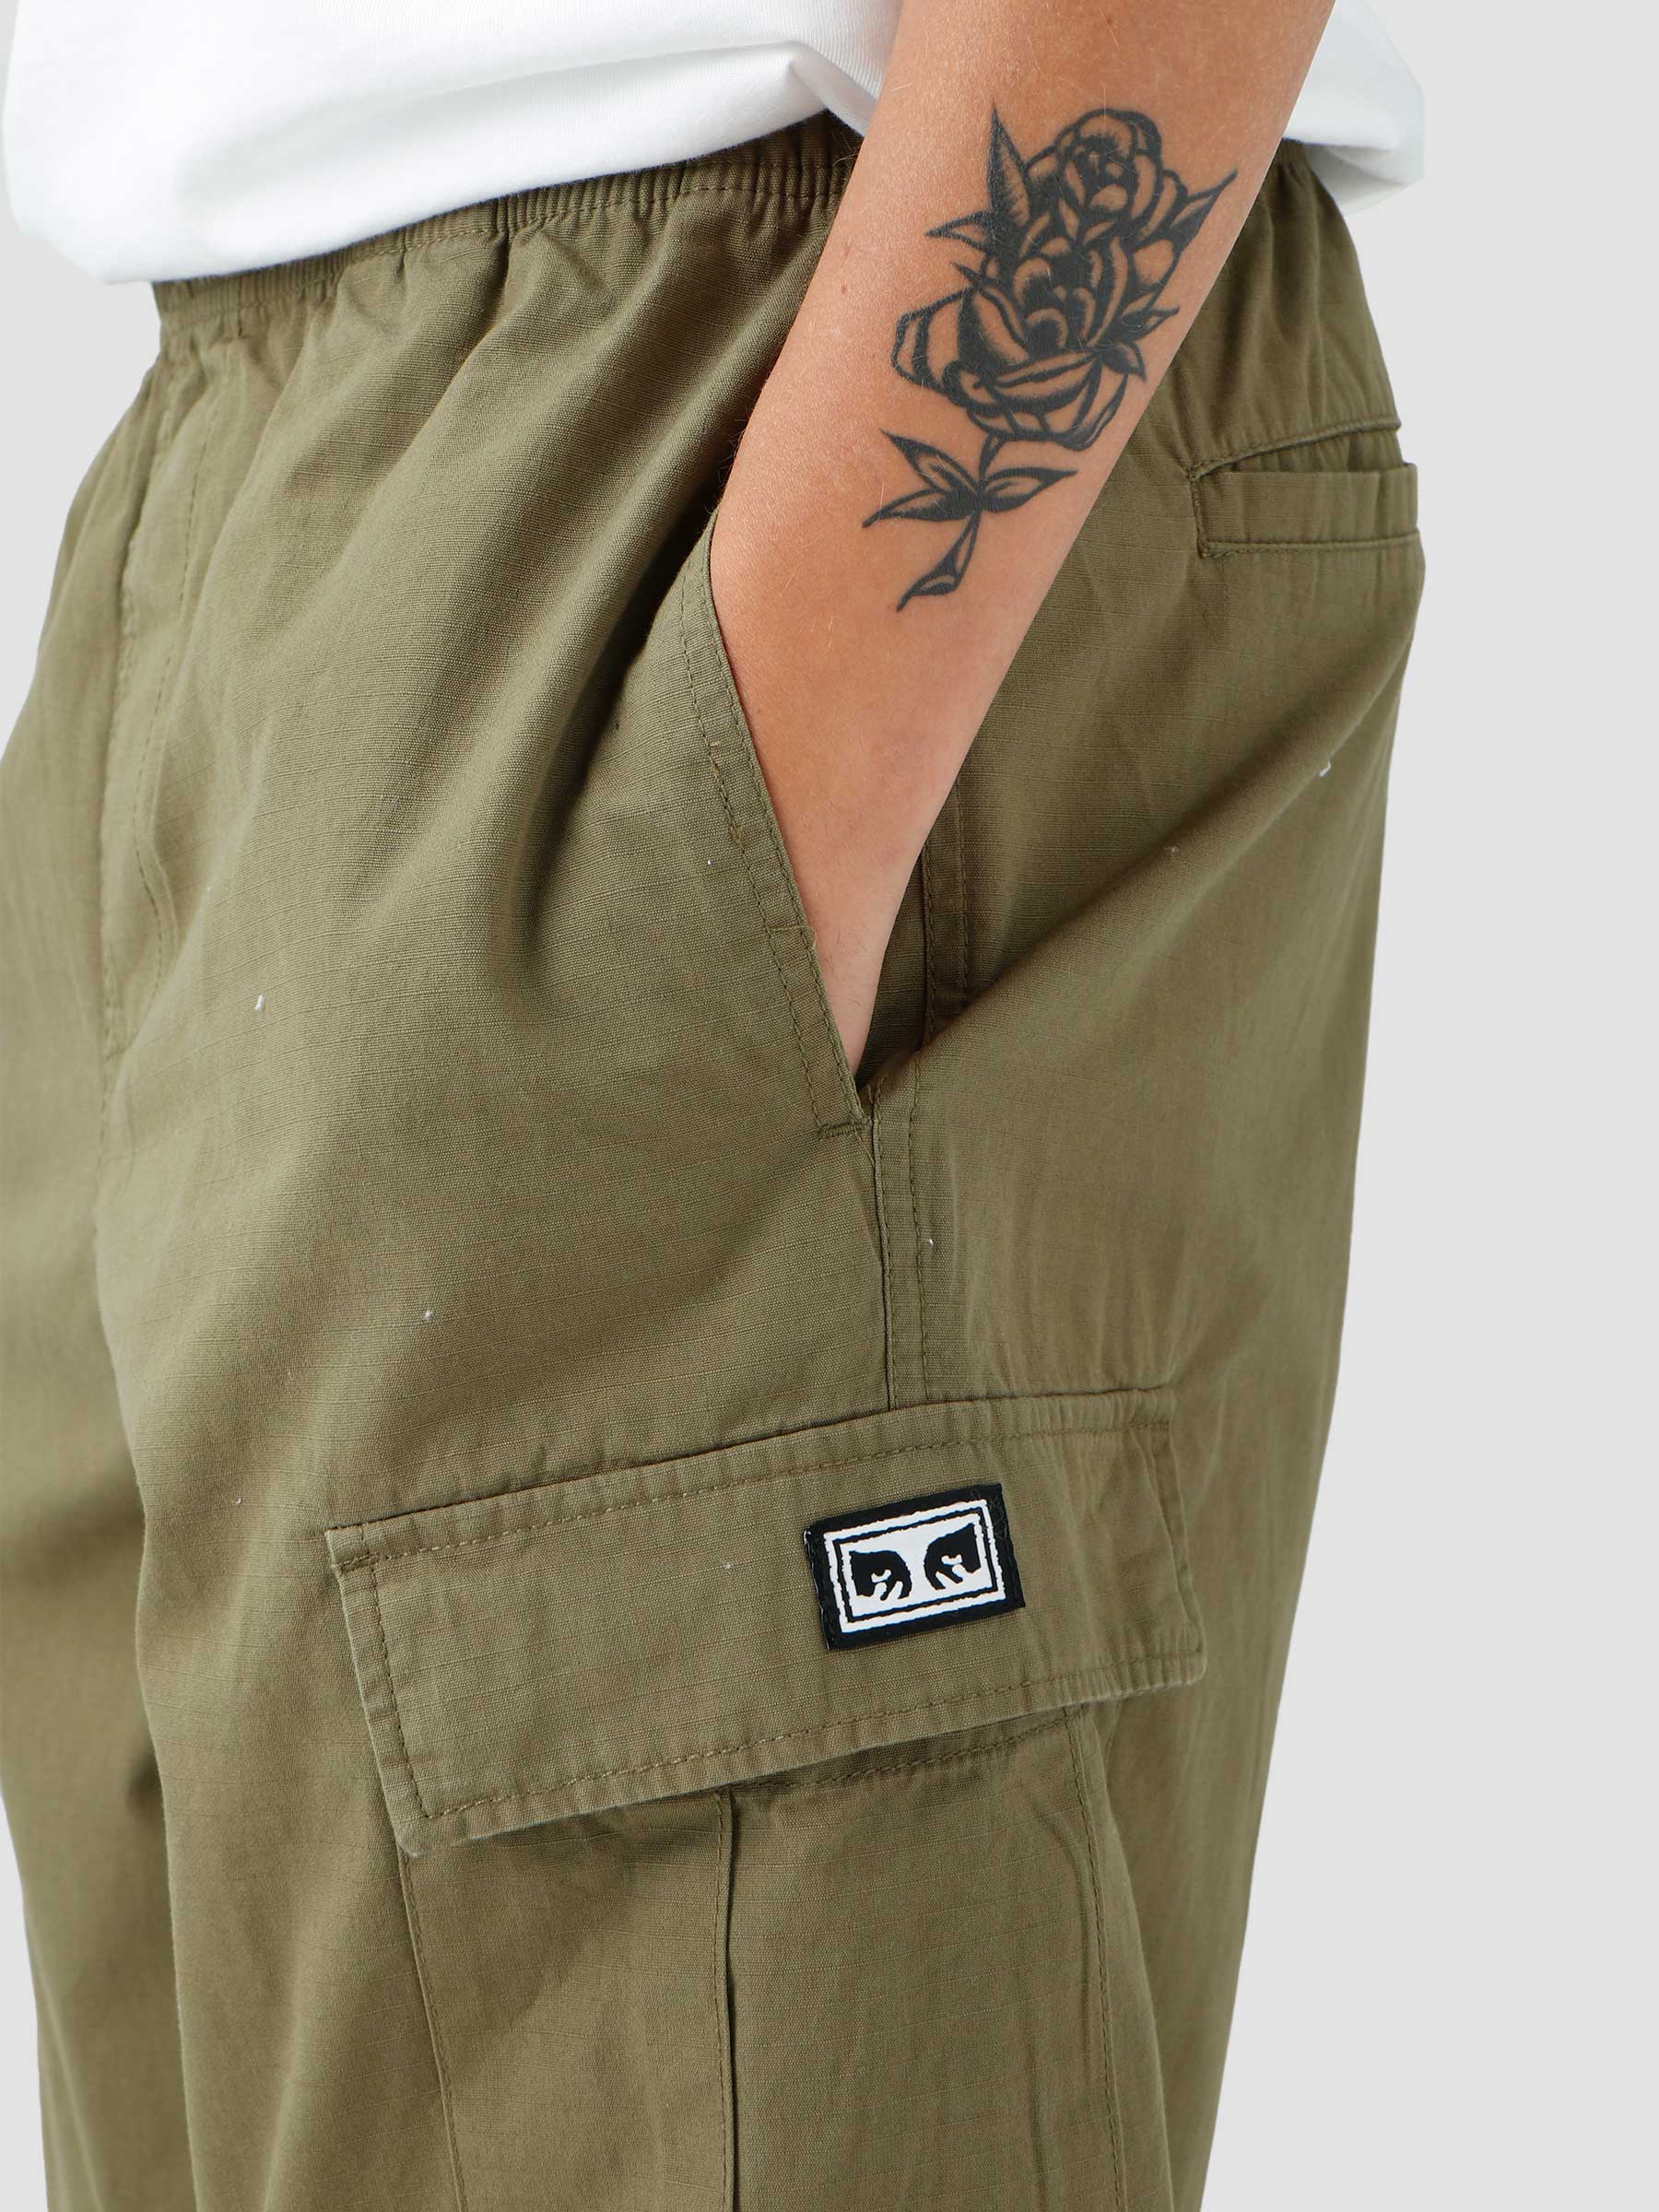 Obey Easy Ripstop Cargo Pant